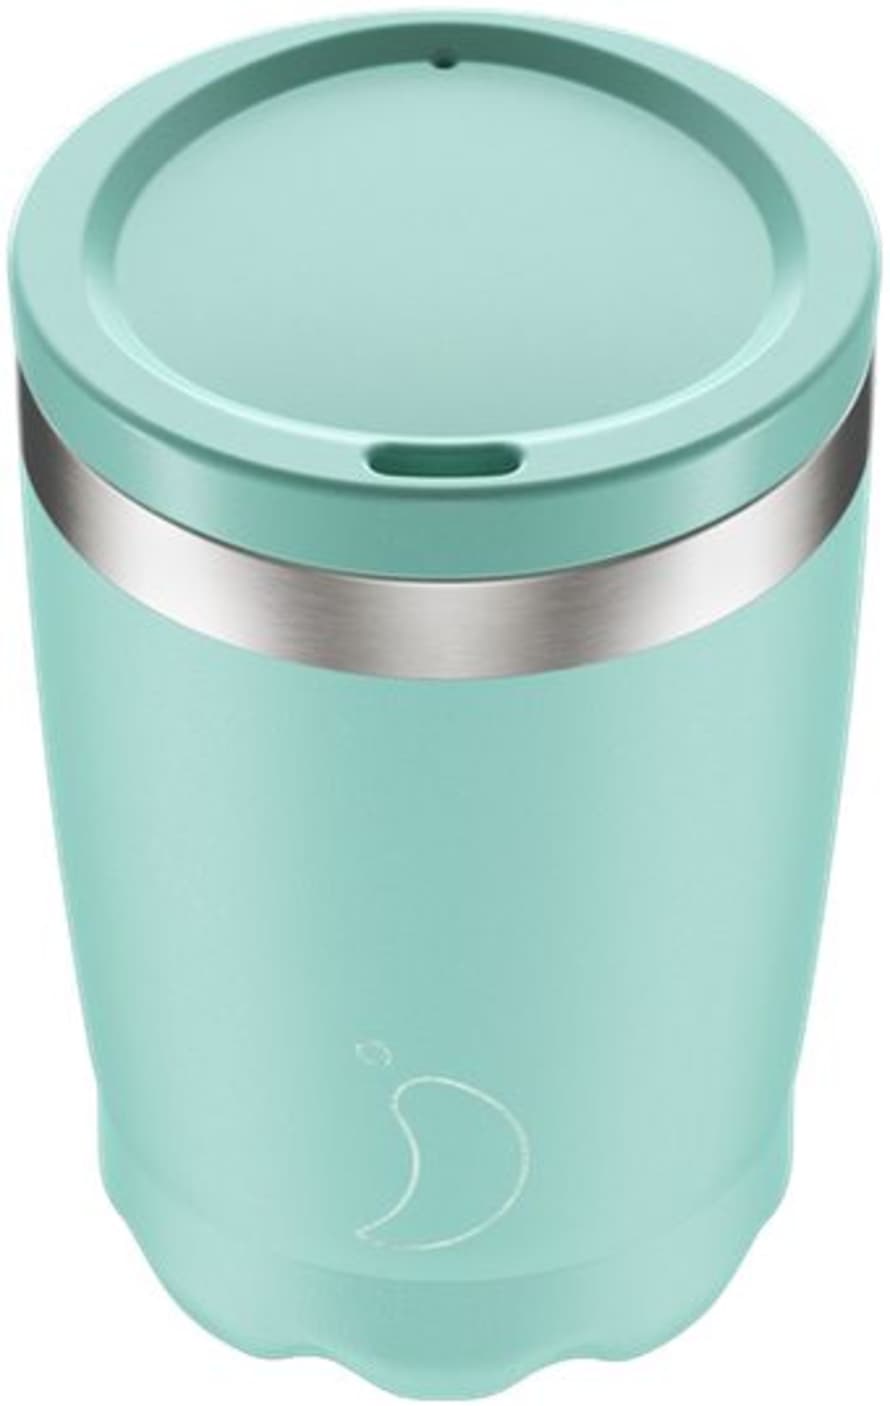 Chilly's 340ml Pastel Green Coffee Cup